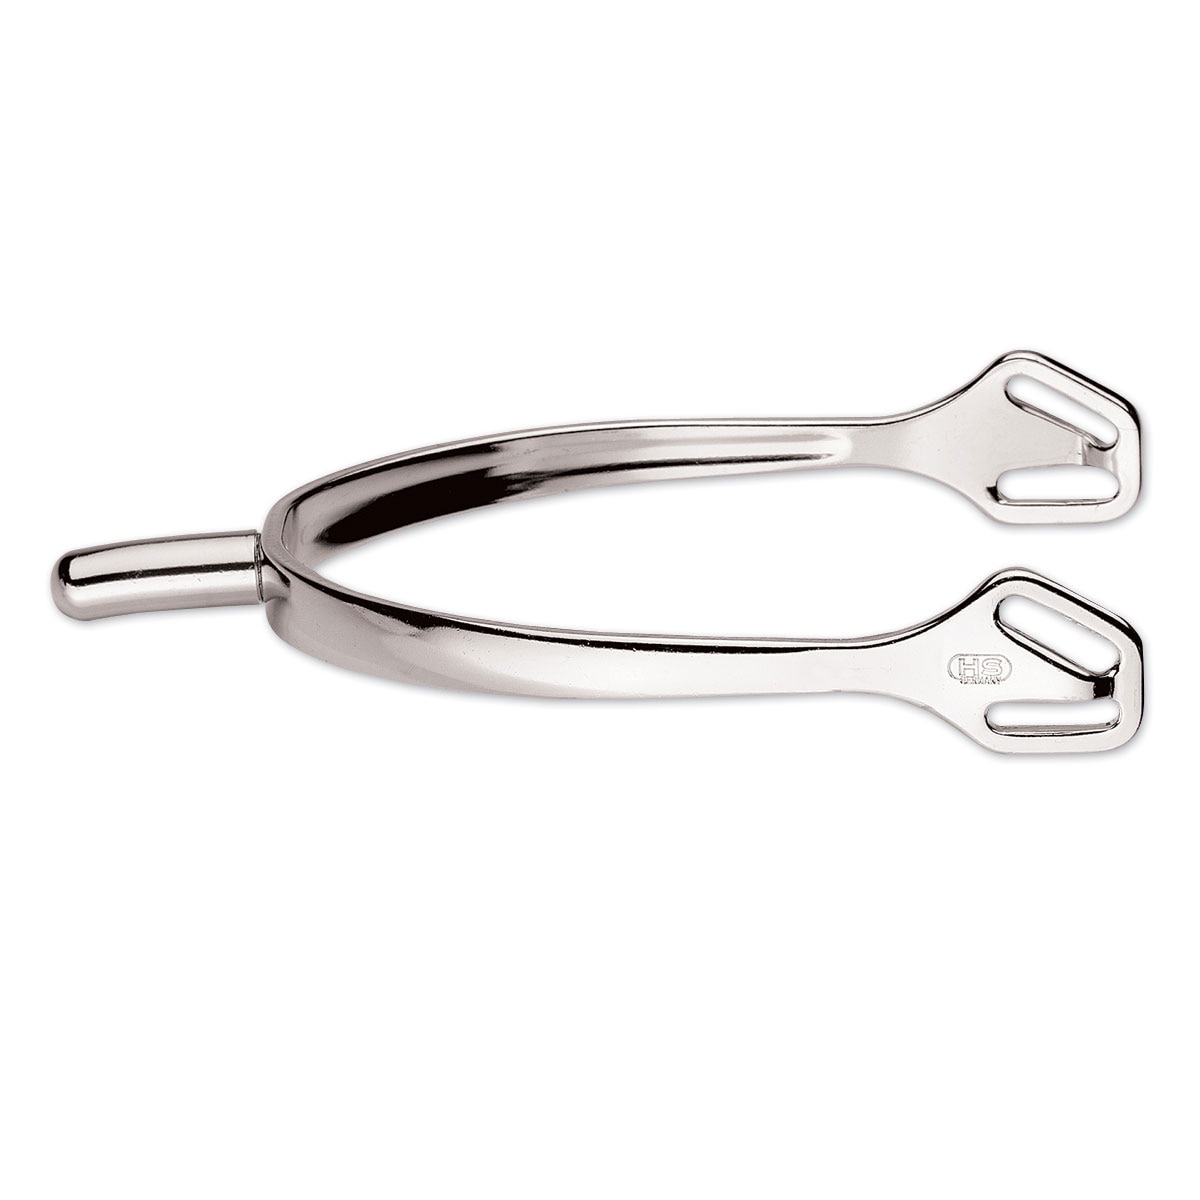 Sprenger ULTRA FIT SPURS Rounded/Squared/9 Point/Roller/Comfort Stainless Steel 